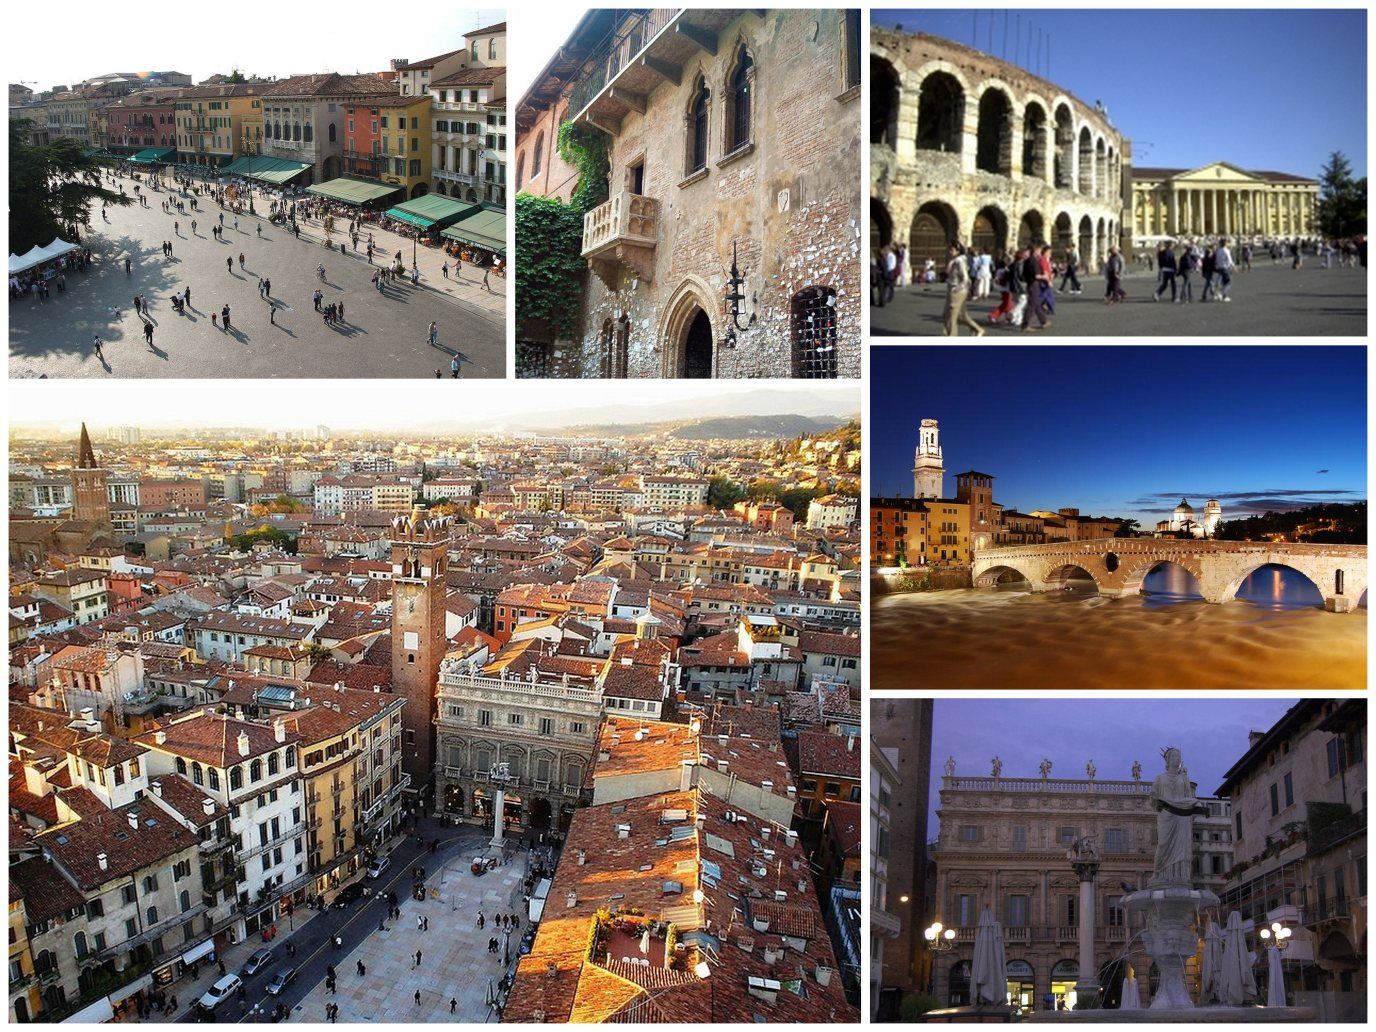 /assets/contentimages/Collage_Verona.jpg